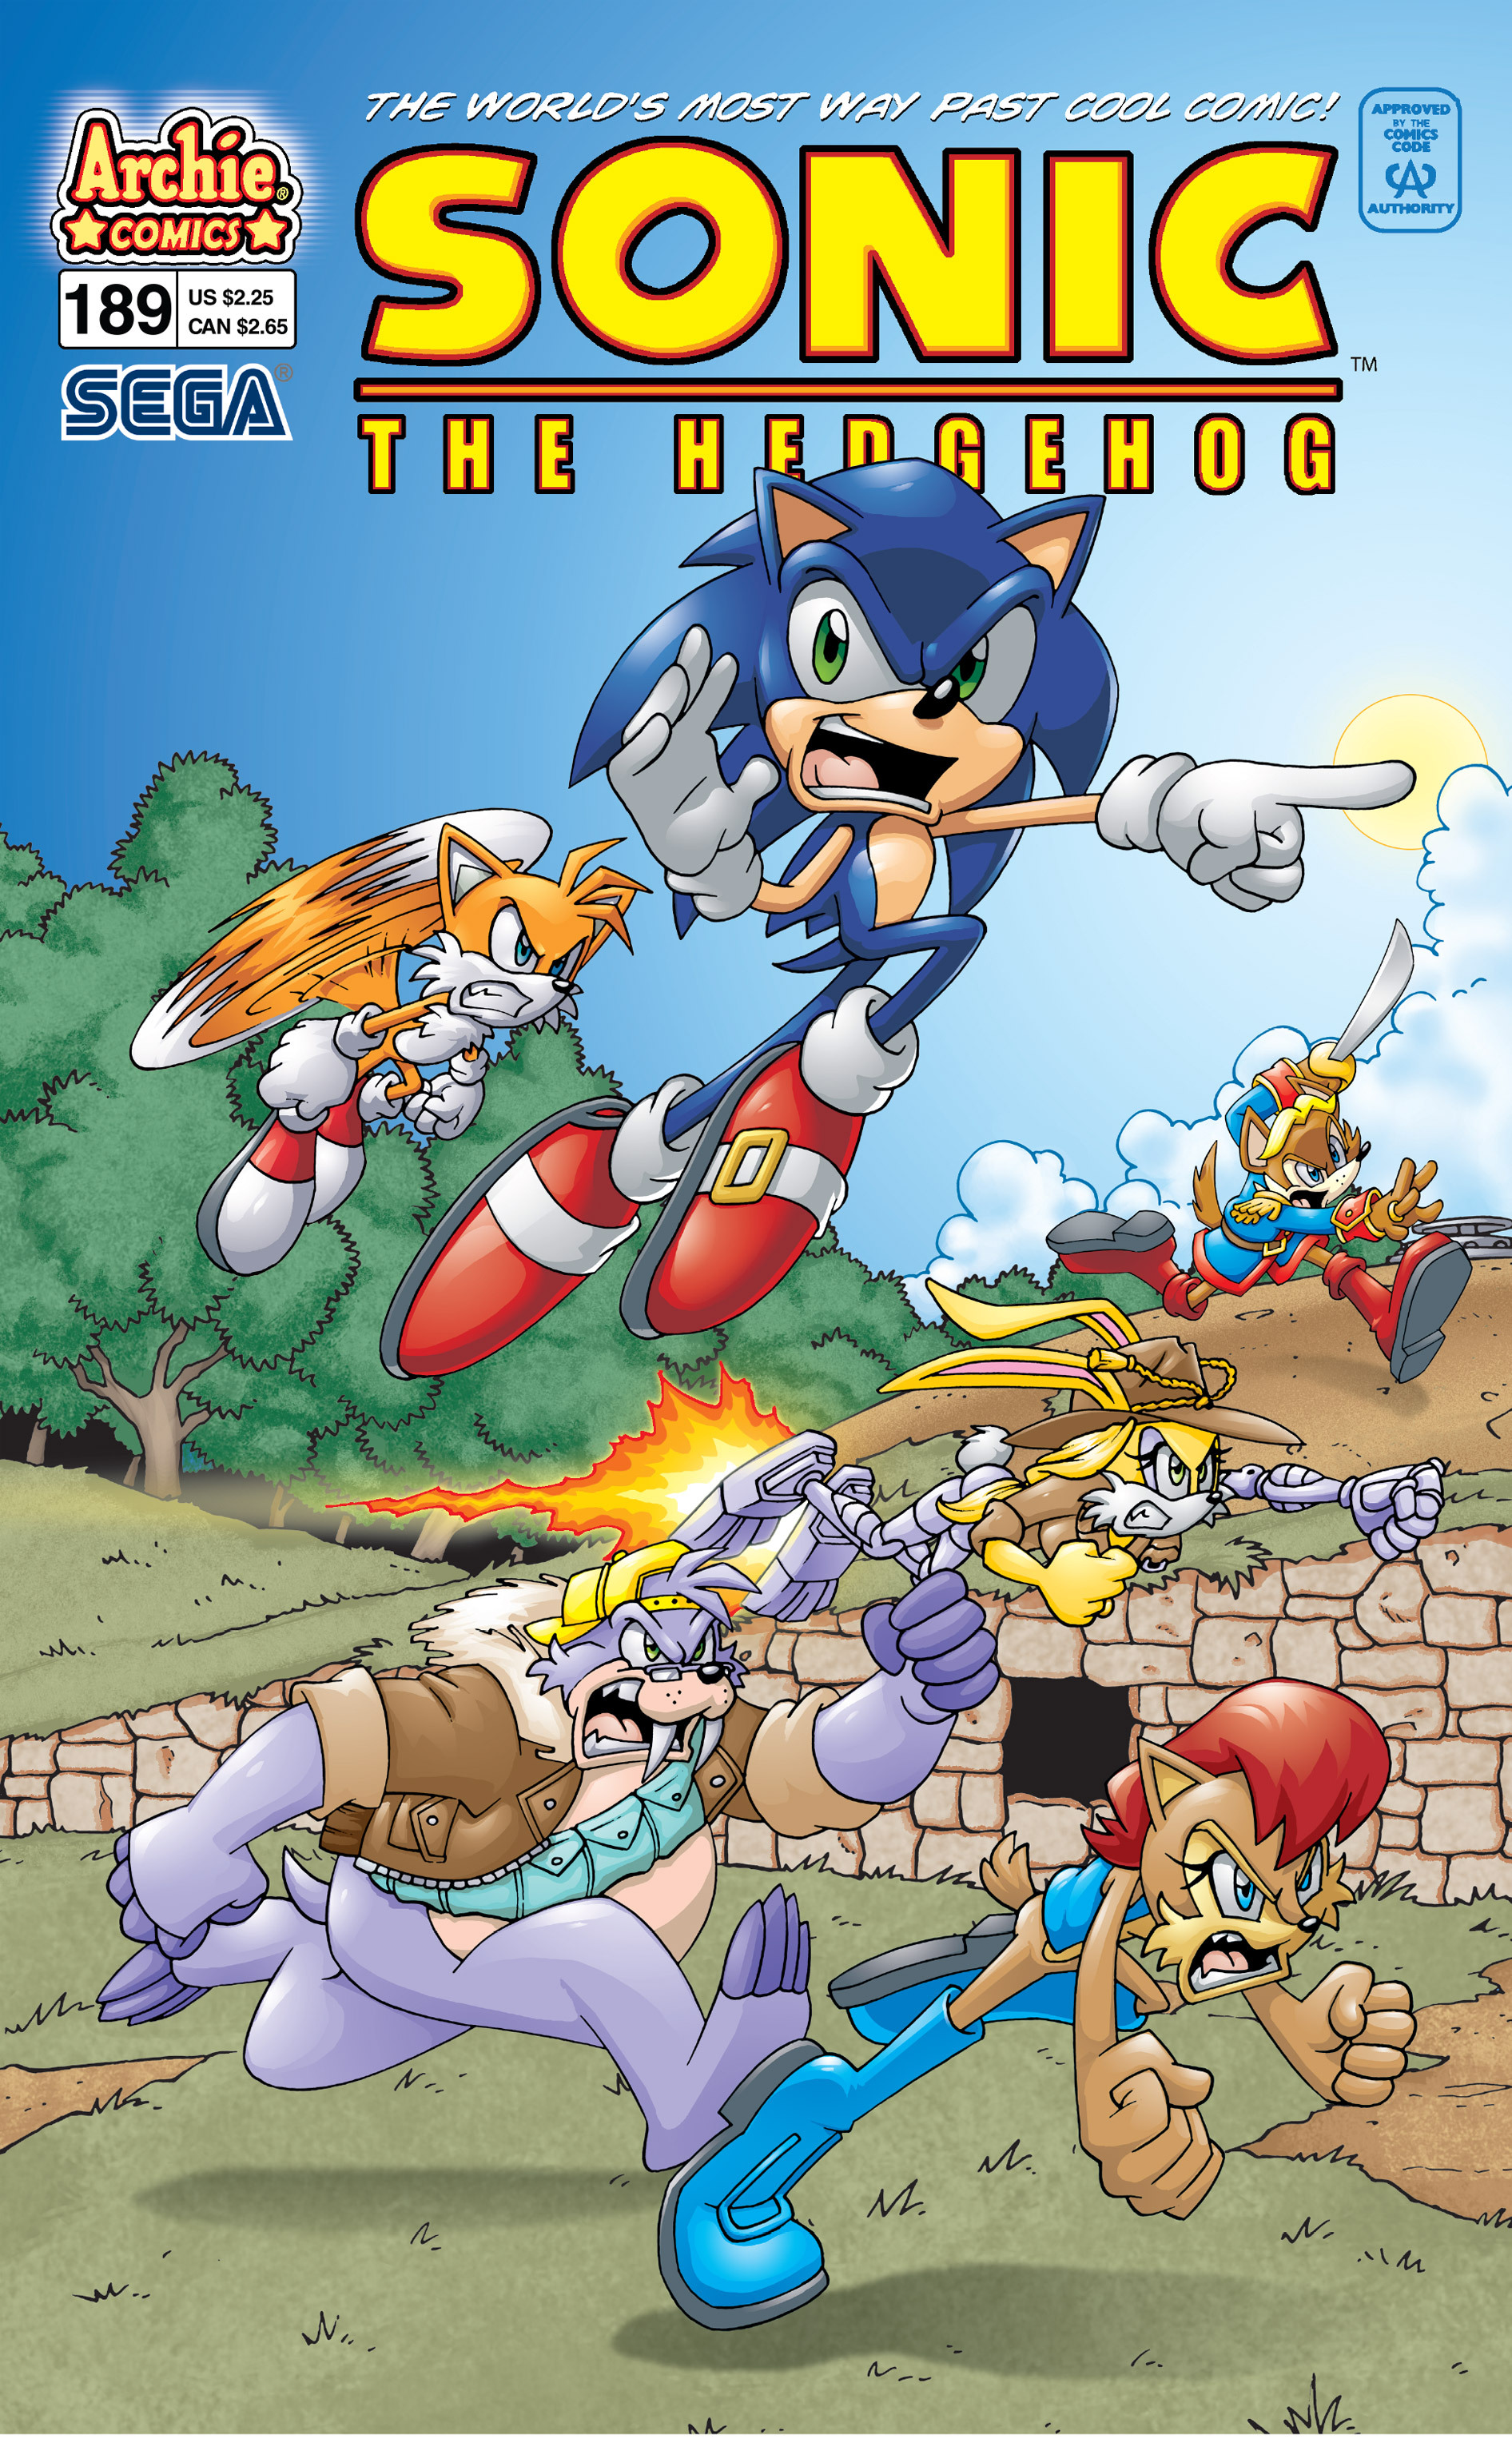 Archie Sonic the Hedgehog Issue 283